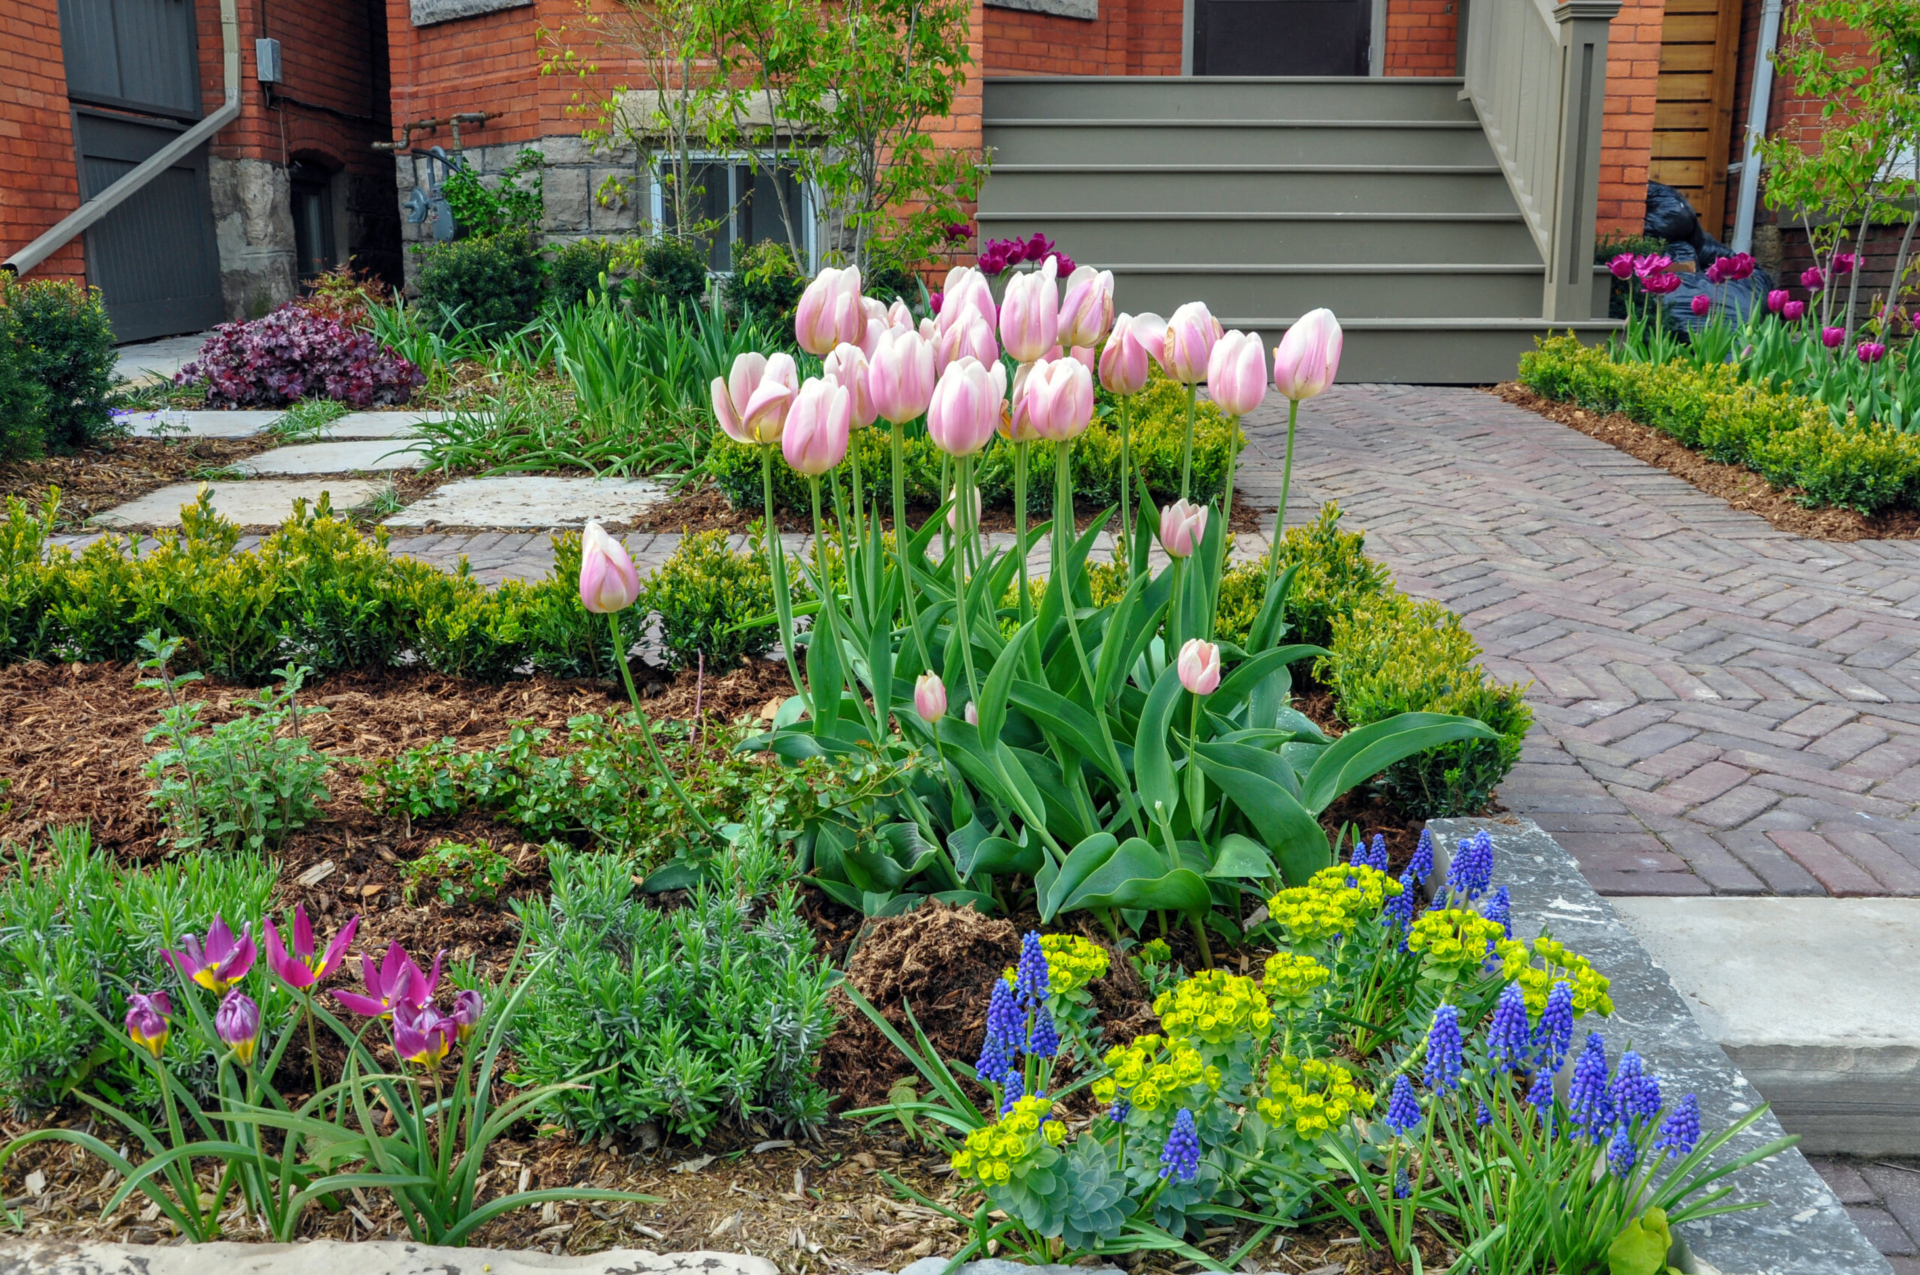 The front garden of an urban home showing flowers and shrubs in mulch, surrounded by paving stones.